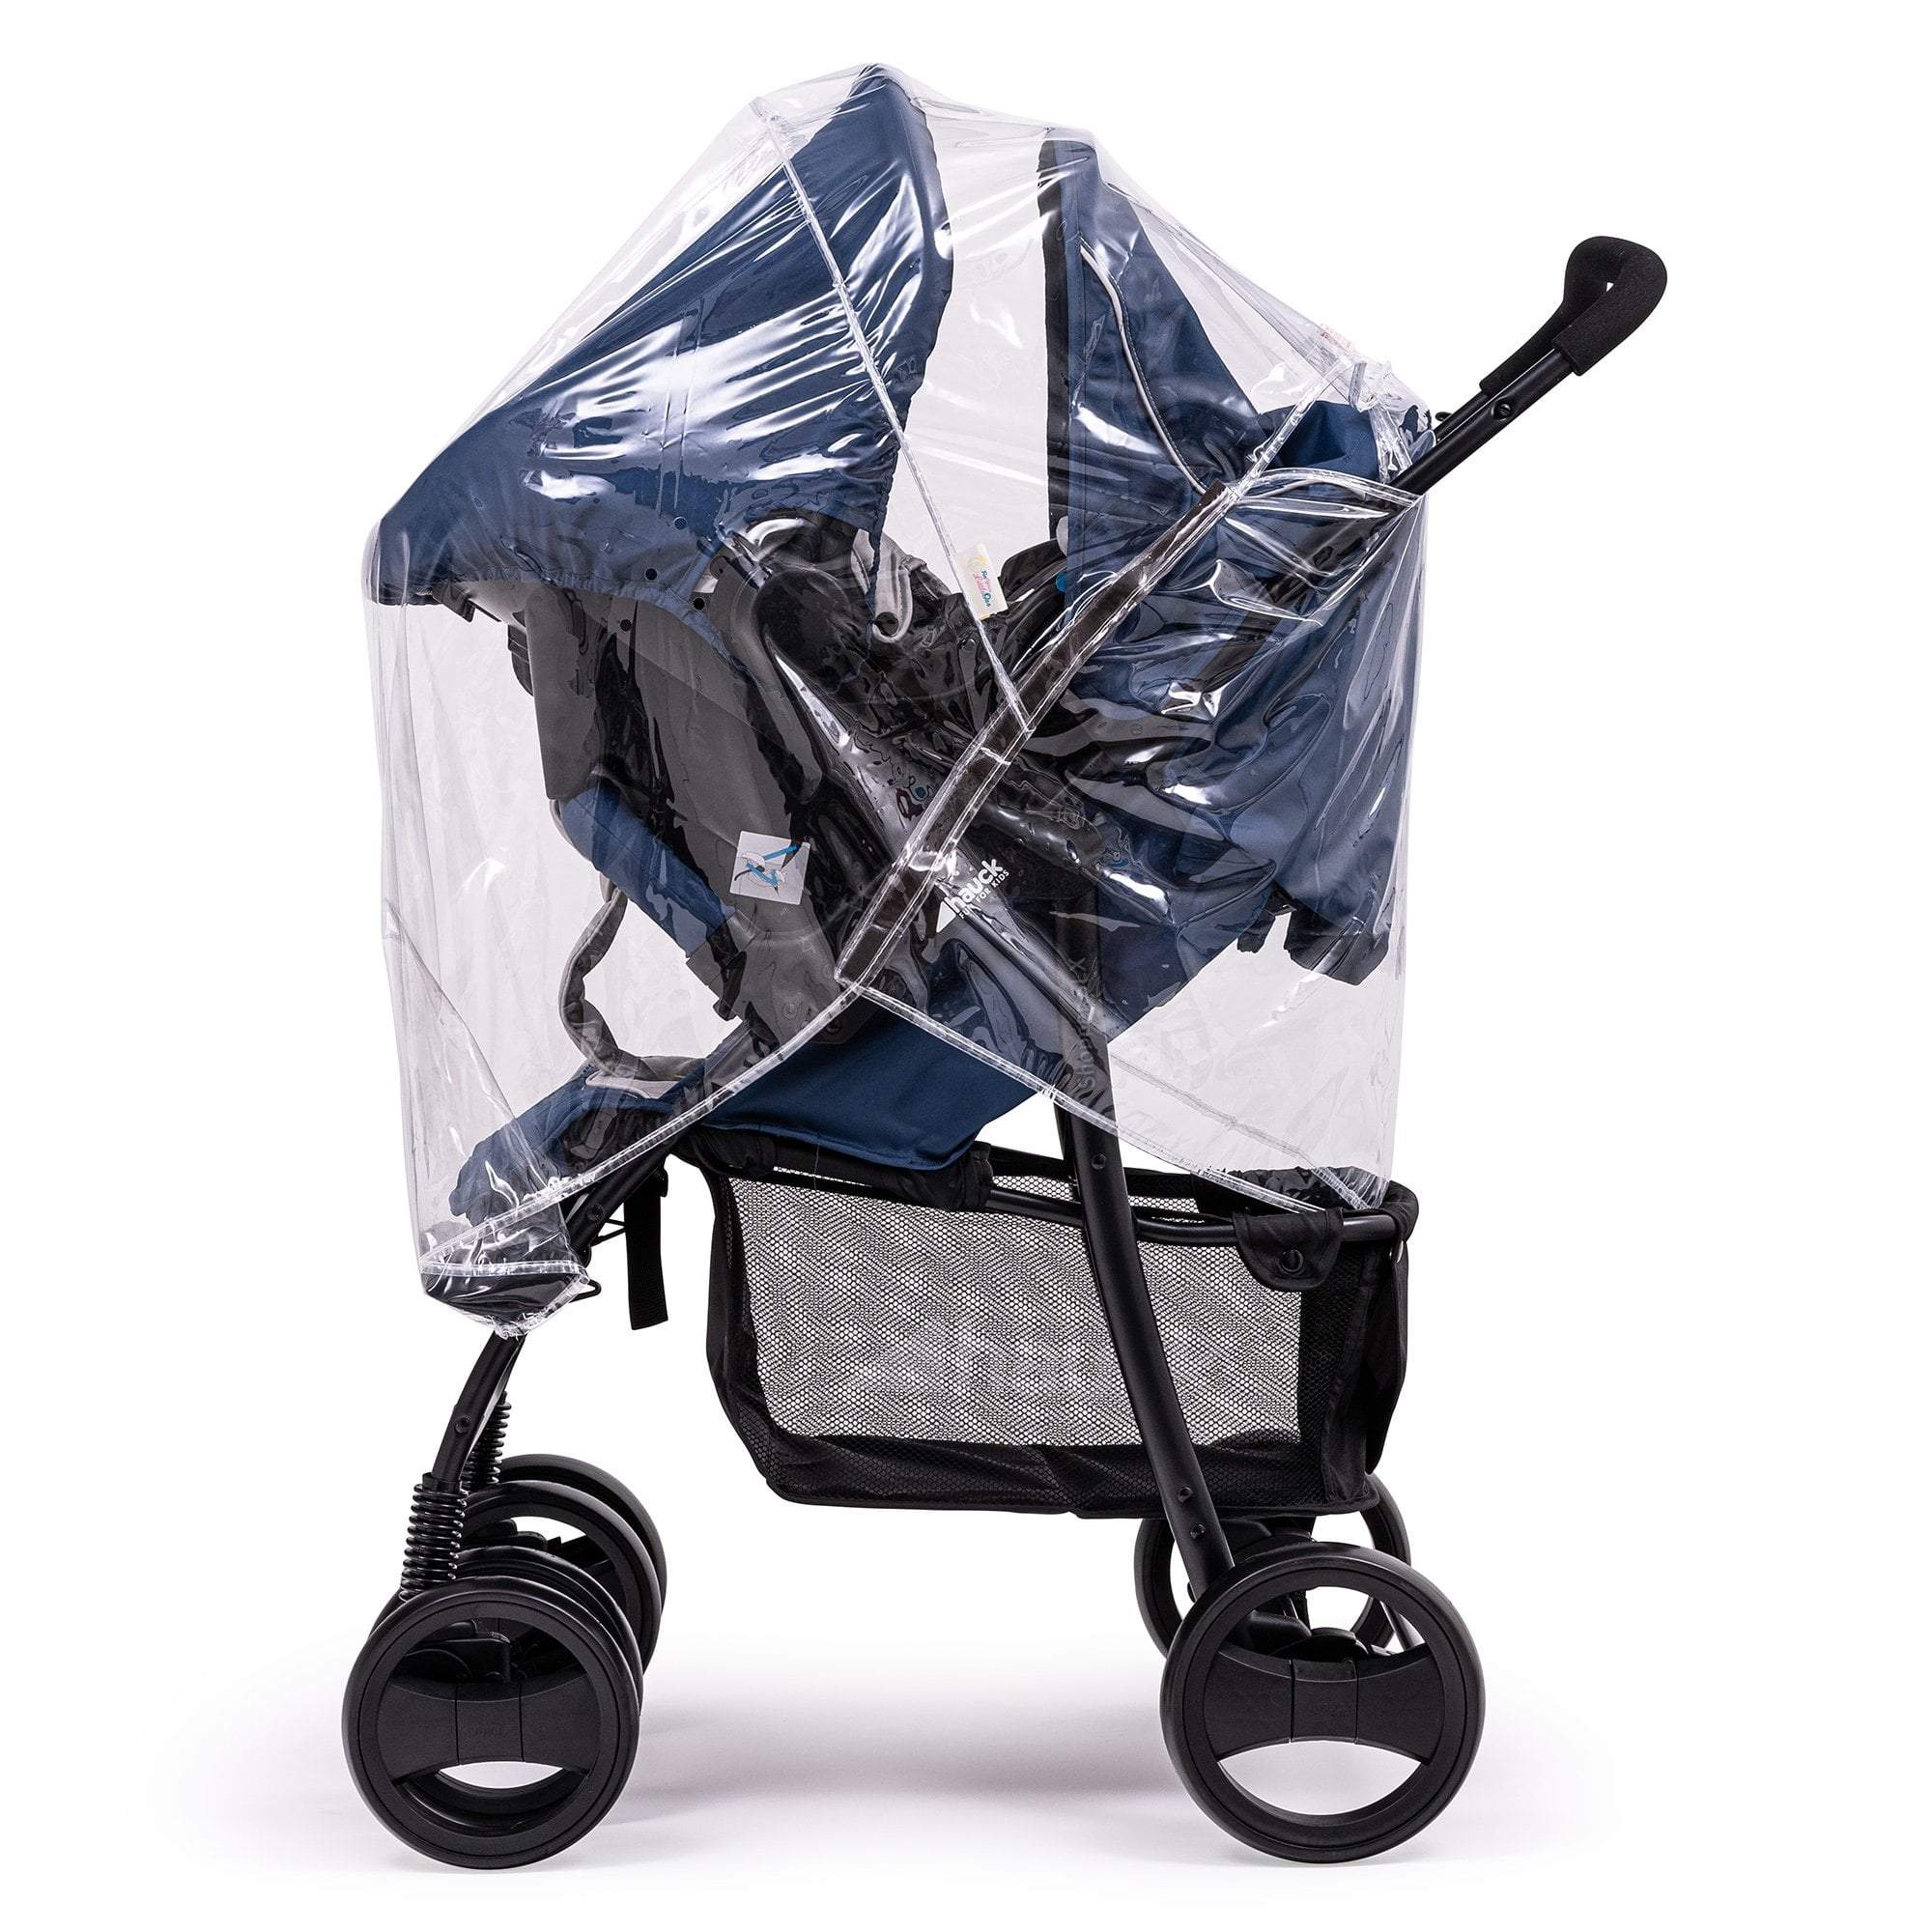 Travel System Raincover Compatible with Tutti Bambini - Fits All Models - For Your Little One